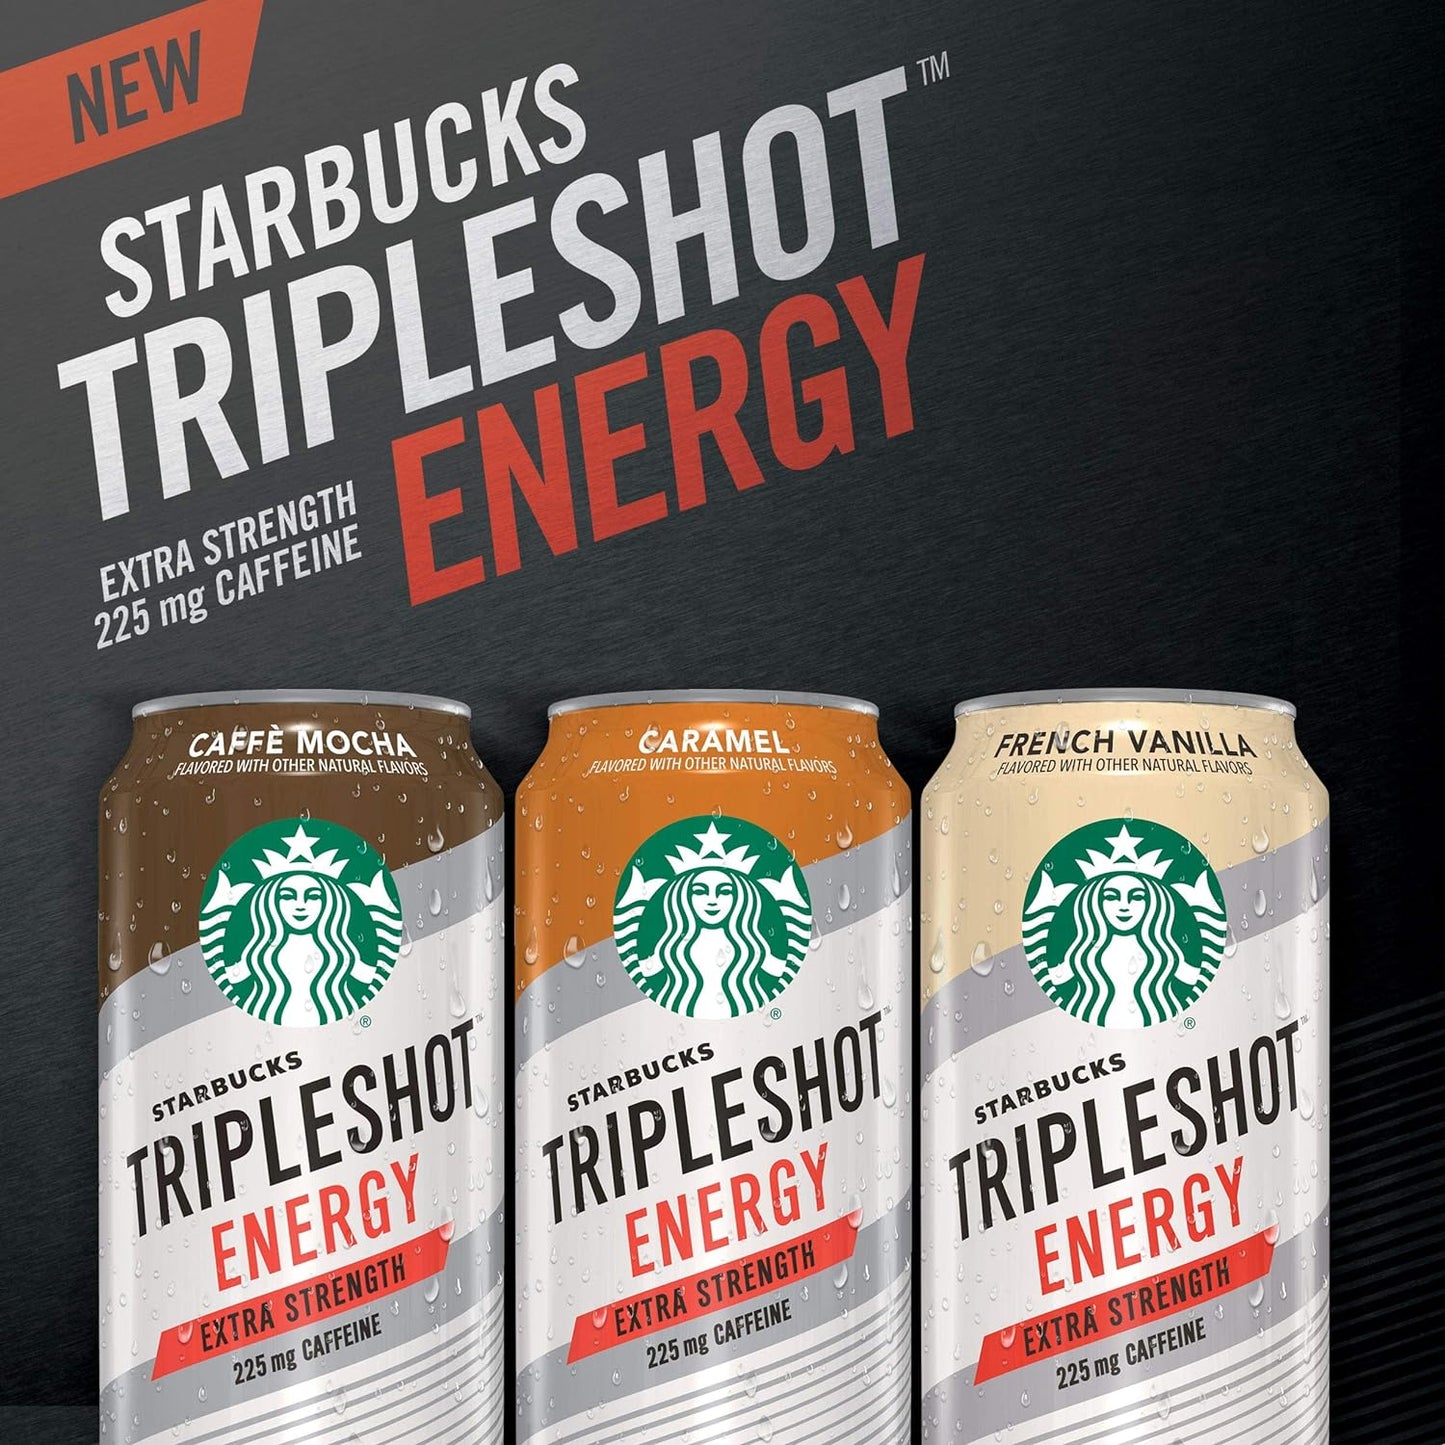 Tripleshot Energy Extra Strength Espresso Coffee Beverage, French Vanilla, 225Mg Caffeine, 15 Oz Cans (12 Pack)